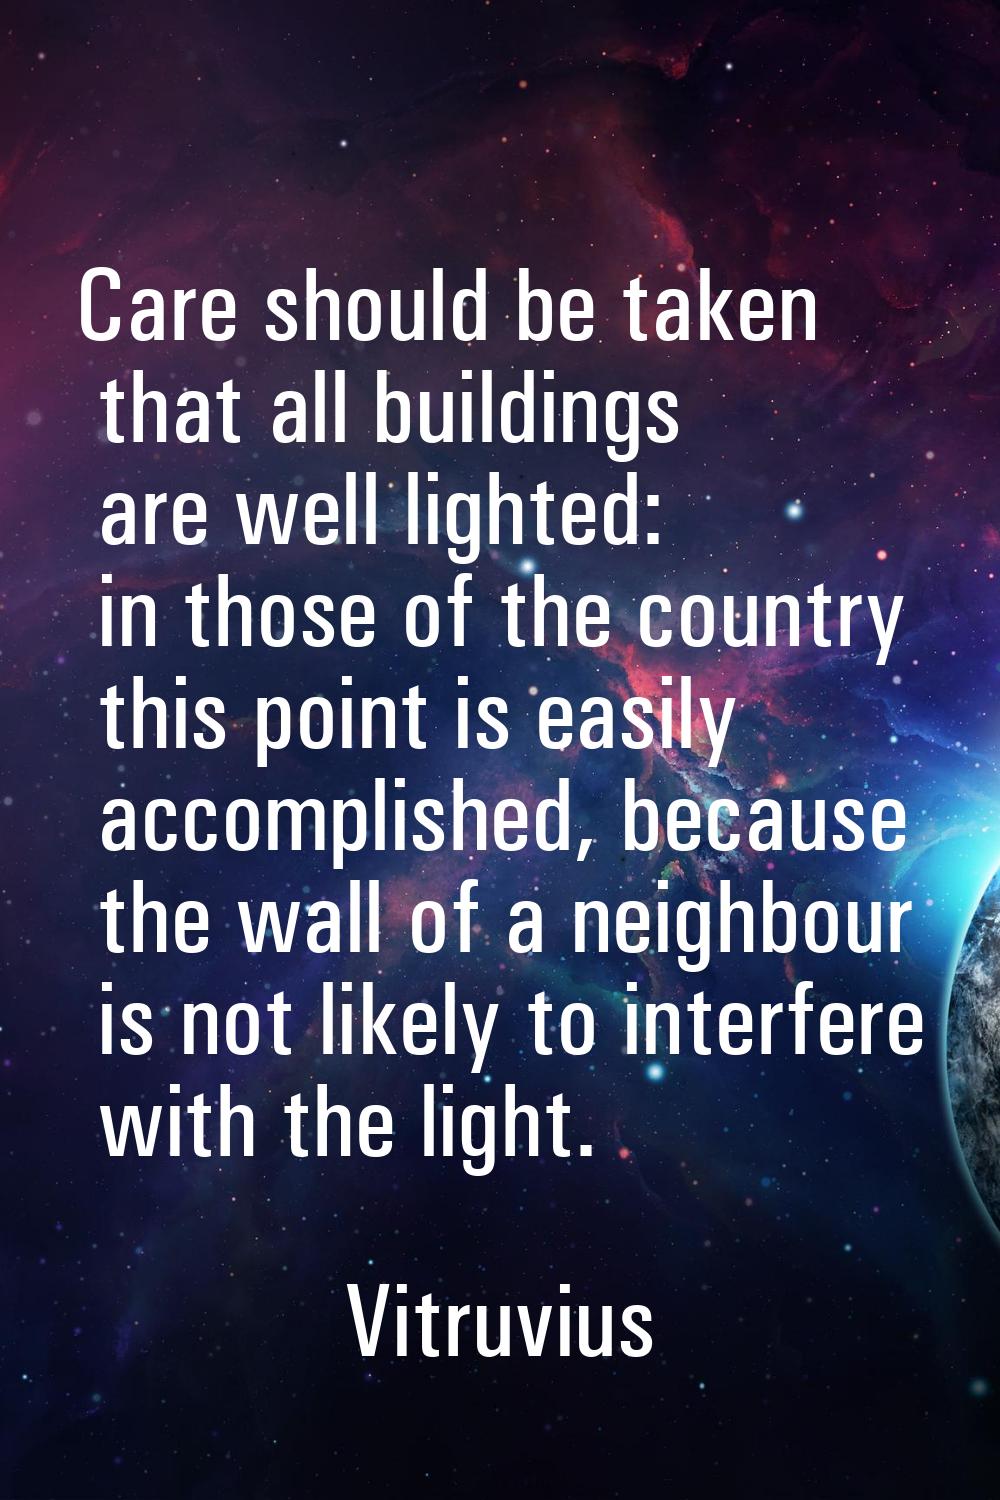 Care should be taken that all buildings are well lighted: in those of the country this point is eas